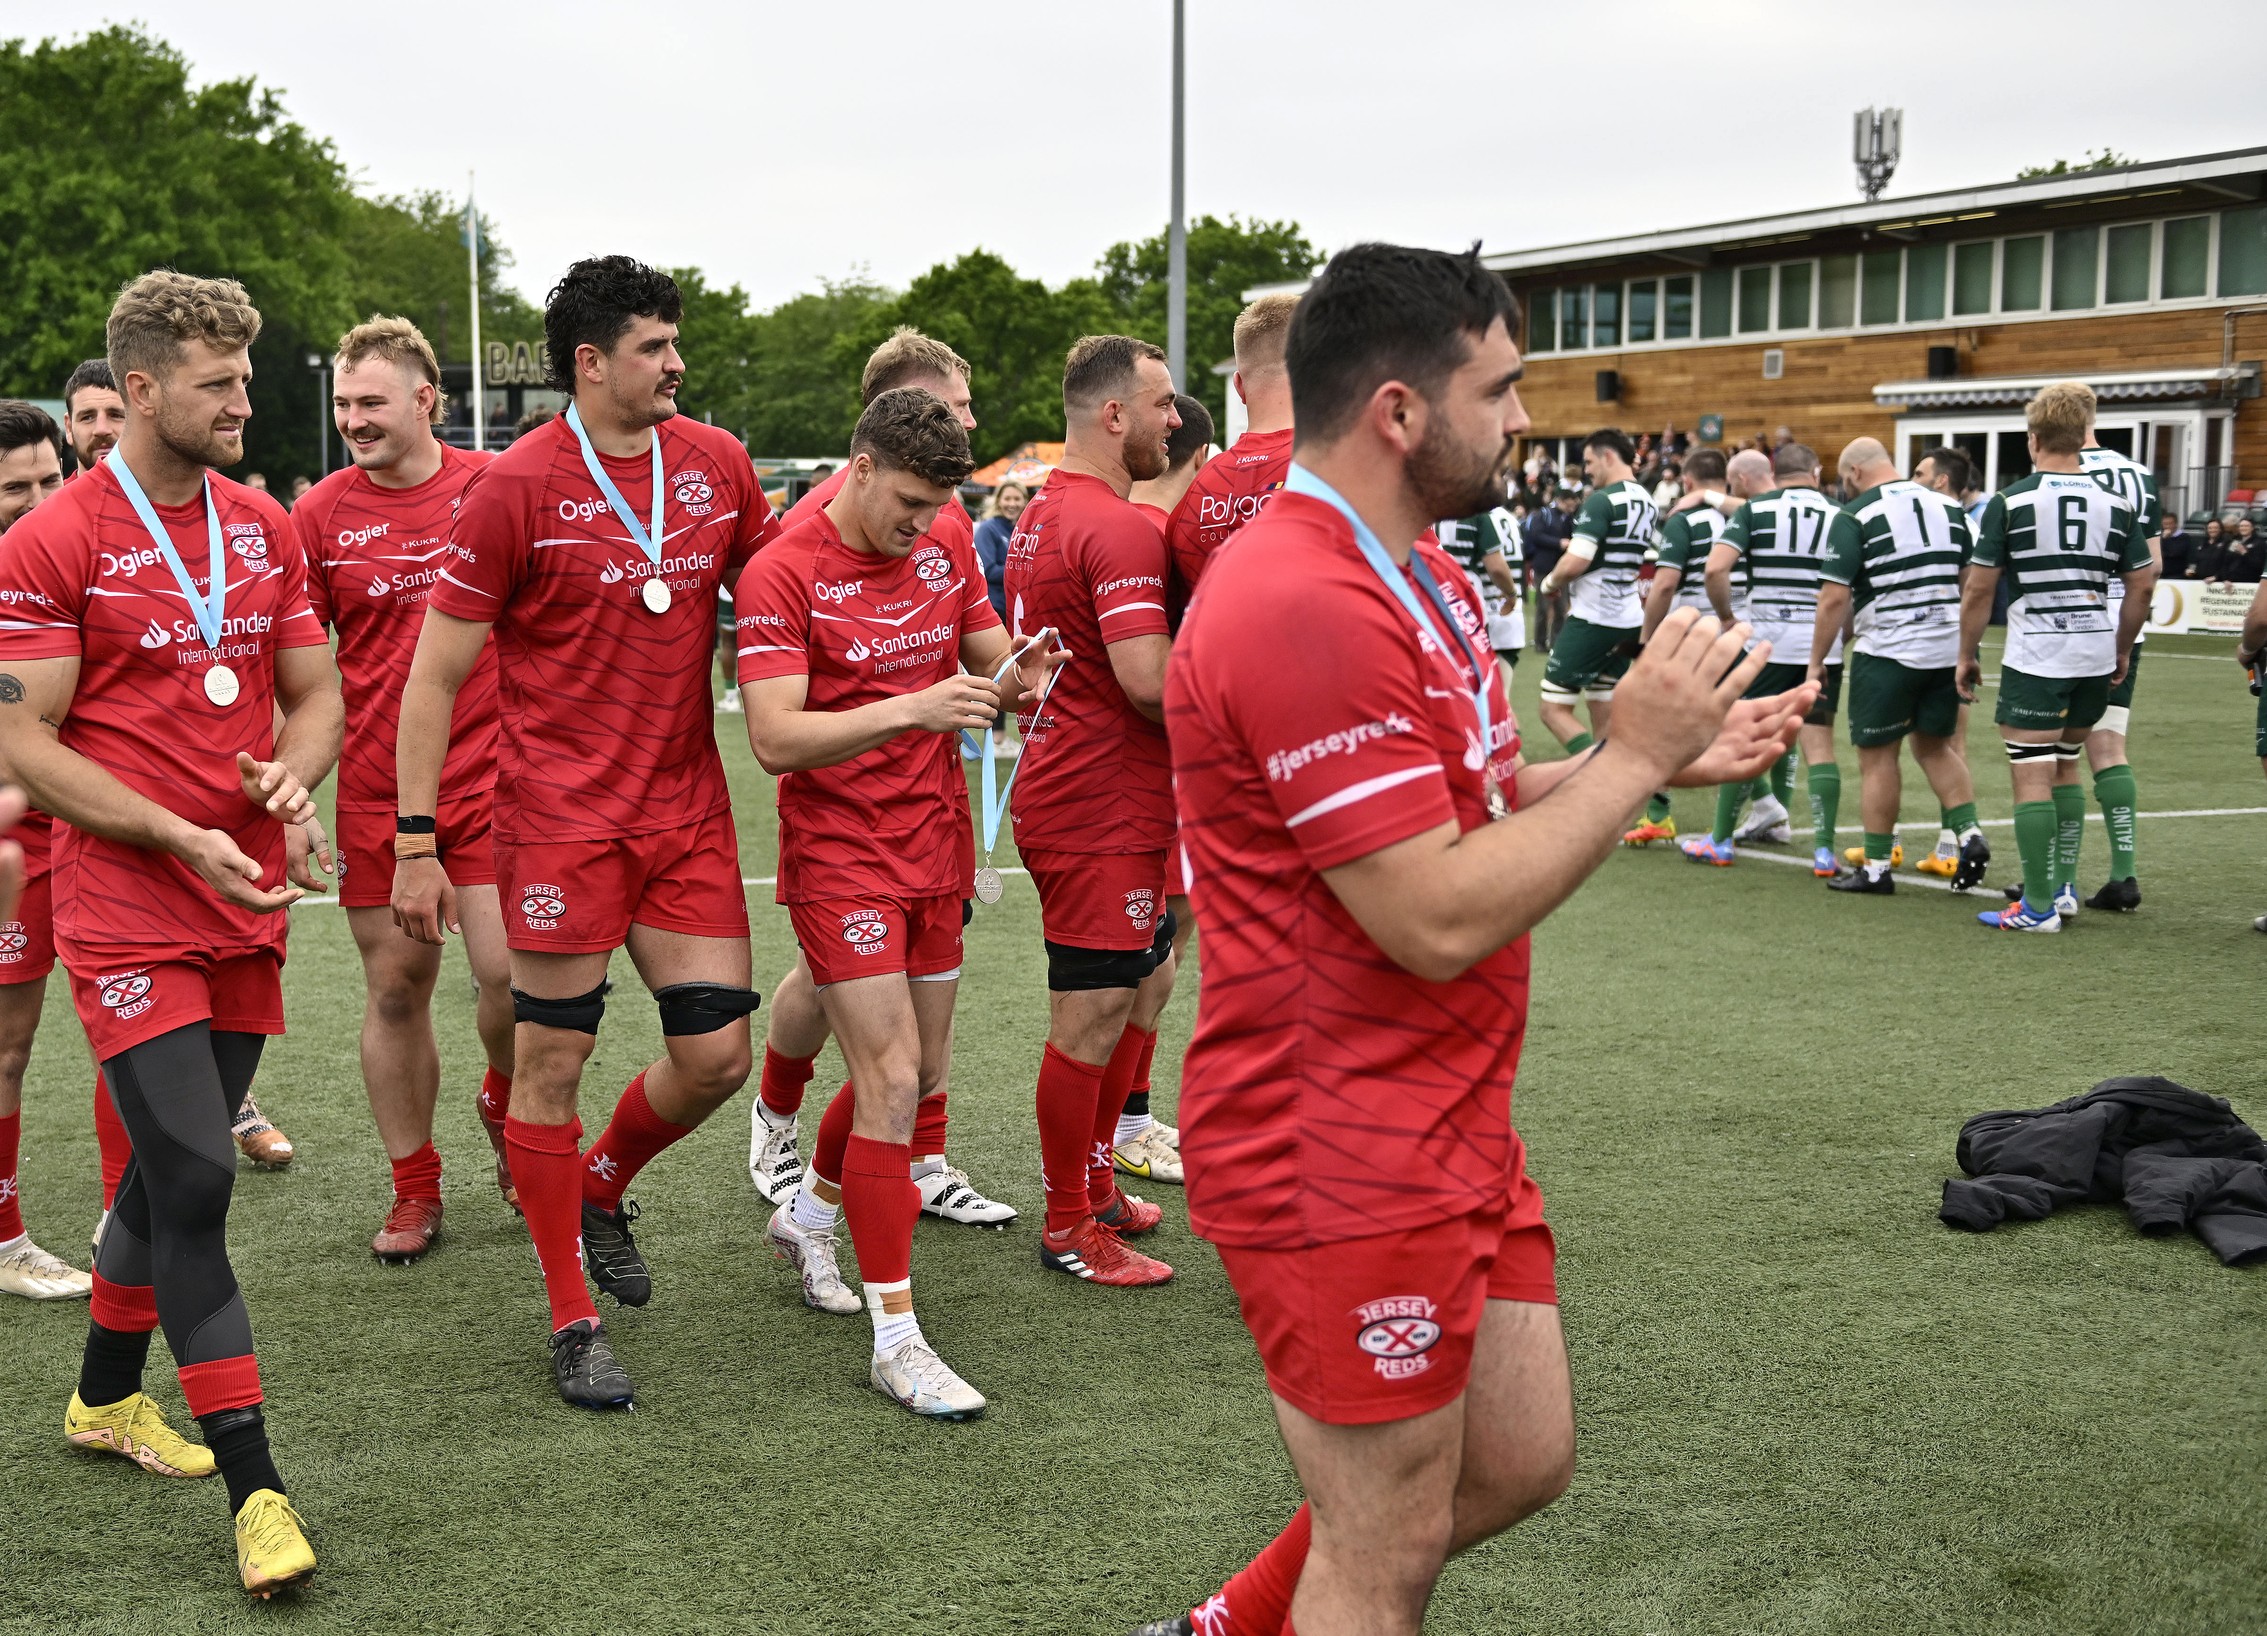 The Jersey players with their silver medals applaud as Ealing go up to receive the trophy during the Ealing Trailfinders V Jersey Reds RFU Championship Cup final rugby match on Saturday 13 May 2023. (Garry Bowden)